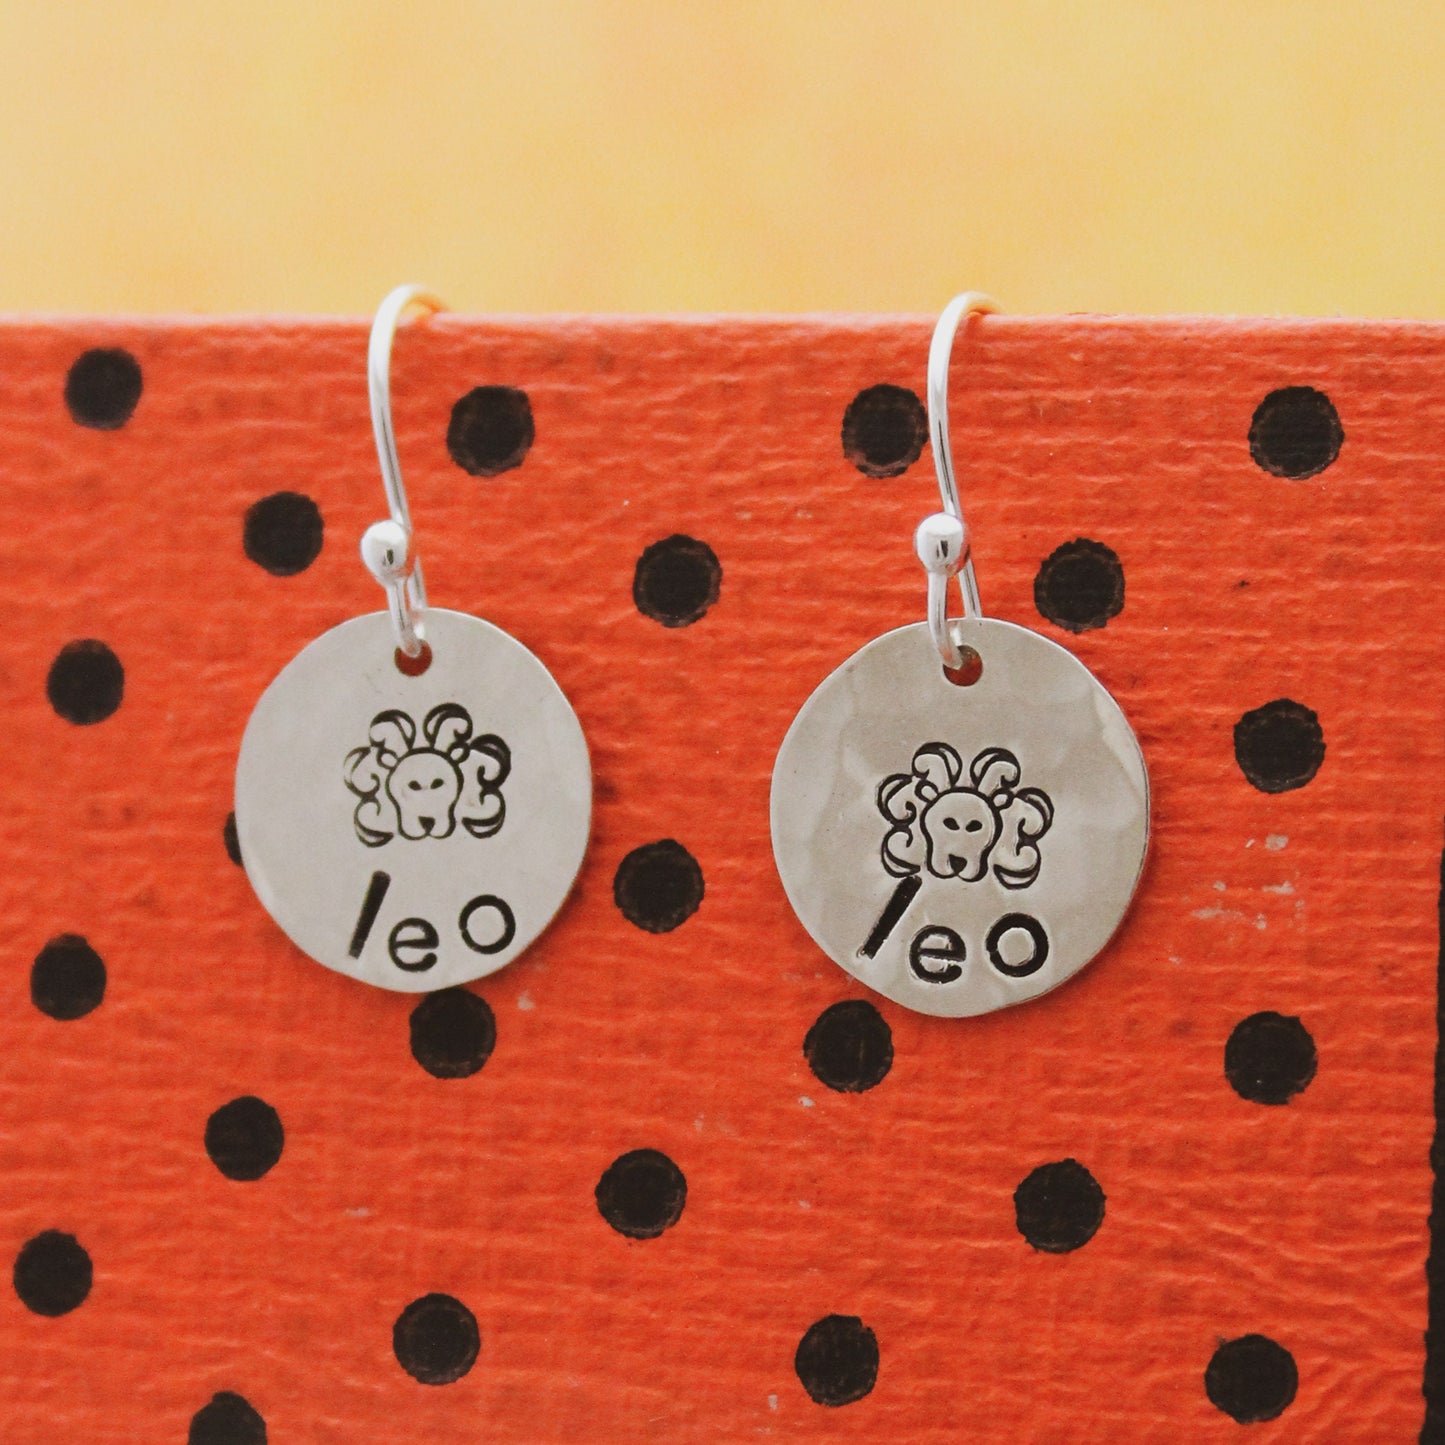 Leo Lion Sterling Silver Earrings, Zodiac Sign Jewelry, Hand Stamped Personalized Earrings, Leo Zodiac Jewelry Unique Birthday Gift for Her